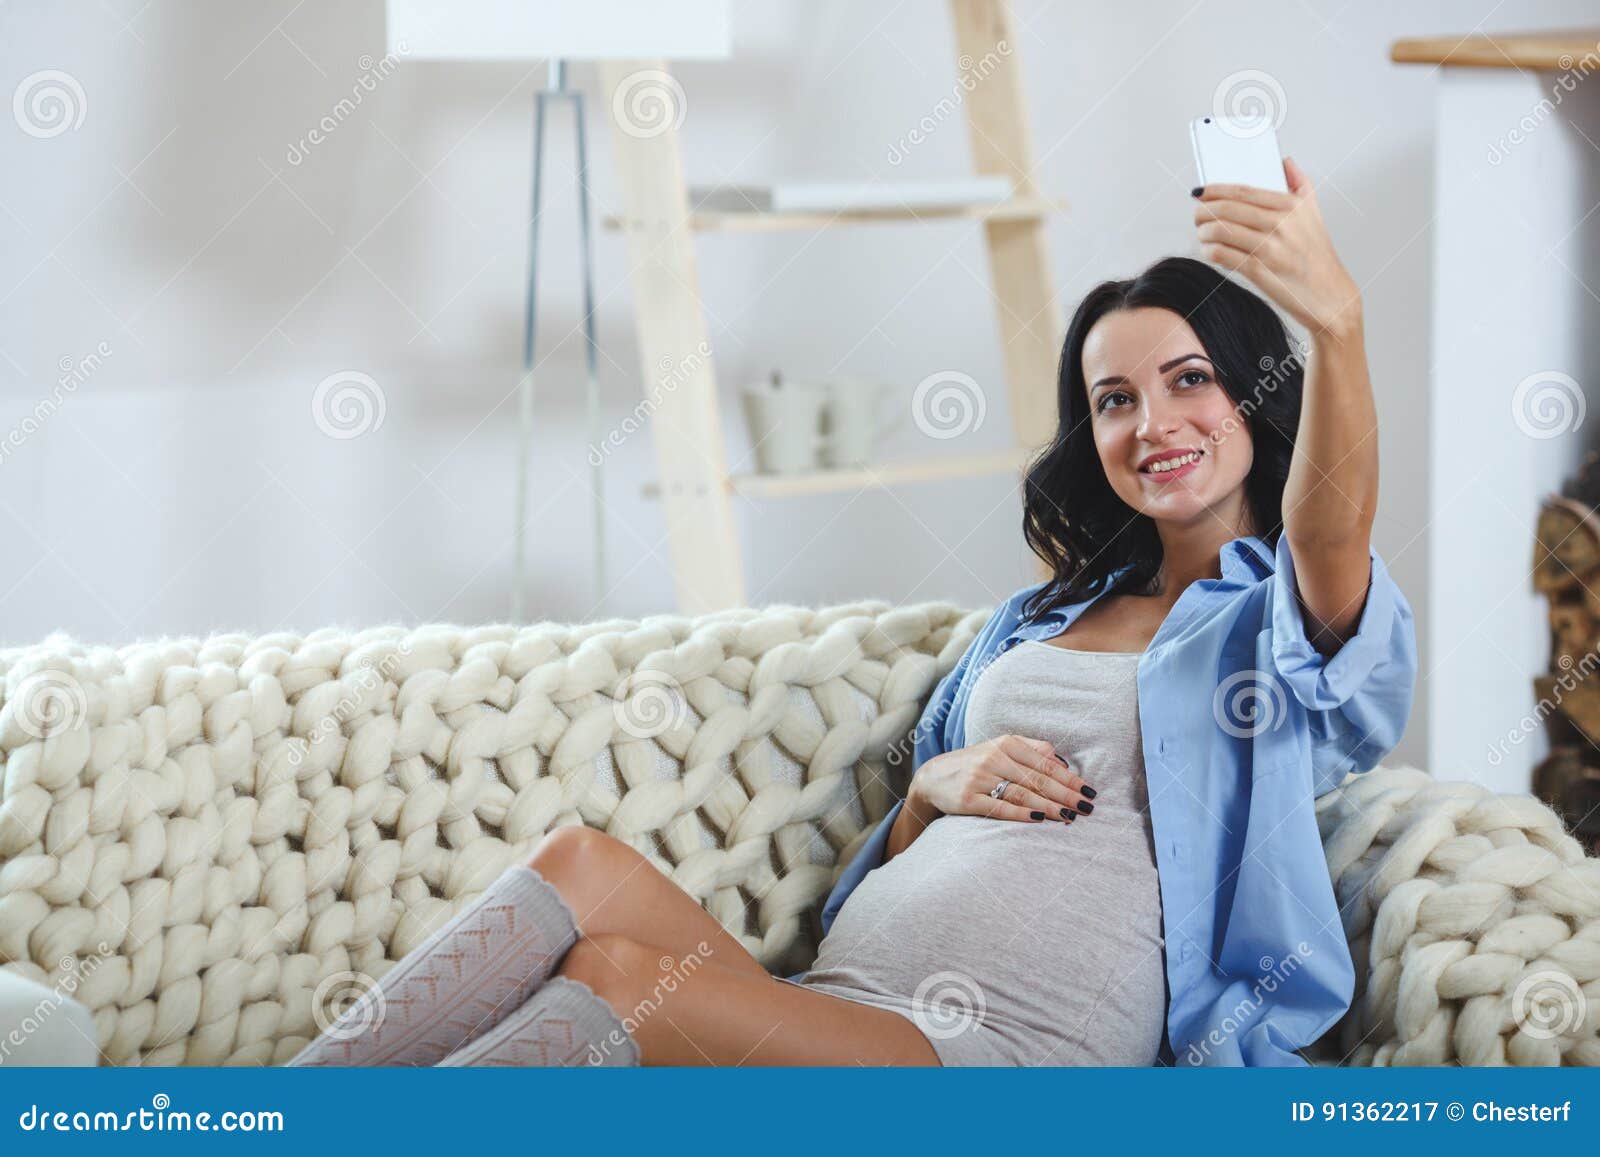 Smiling Pregnant Woman Taking A Self Portrait With Her